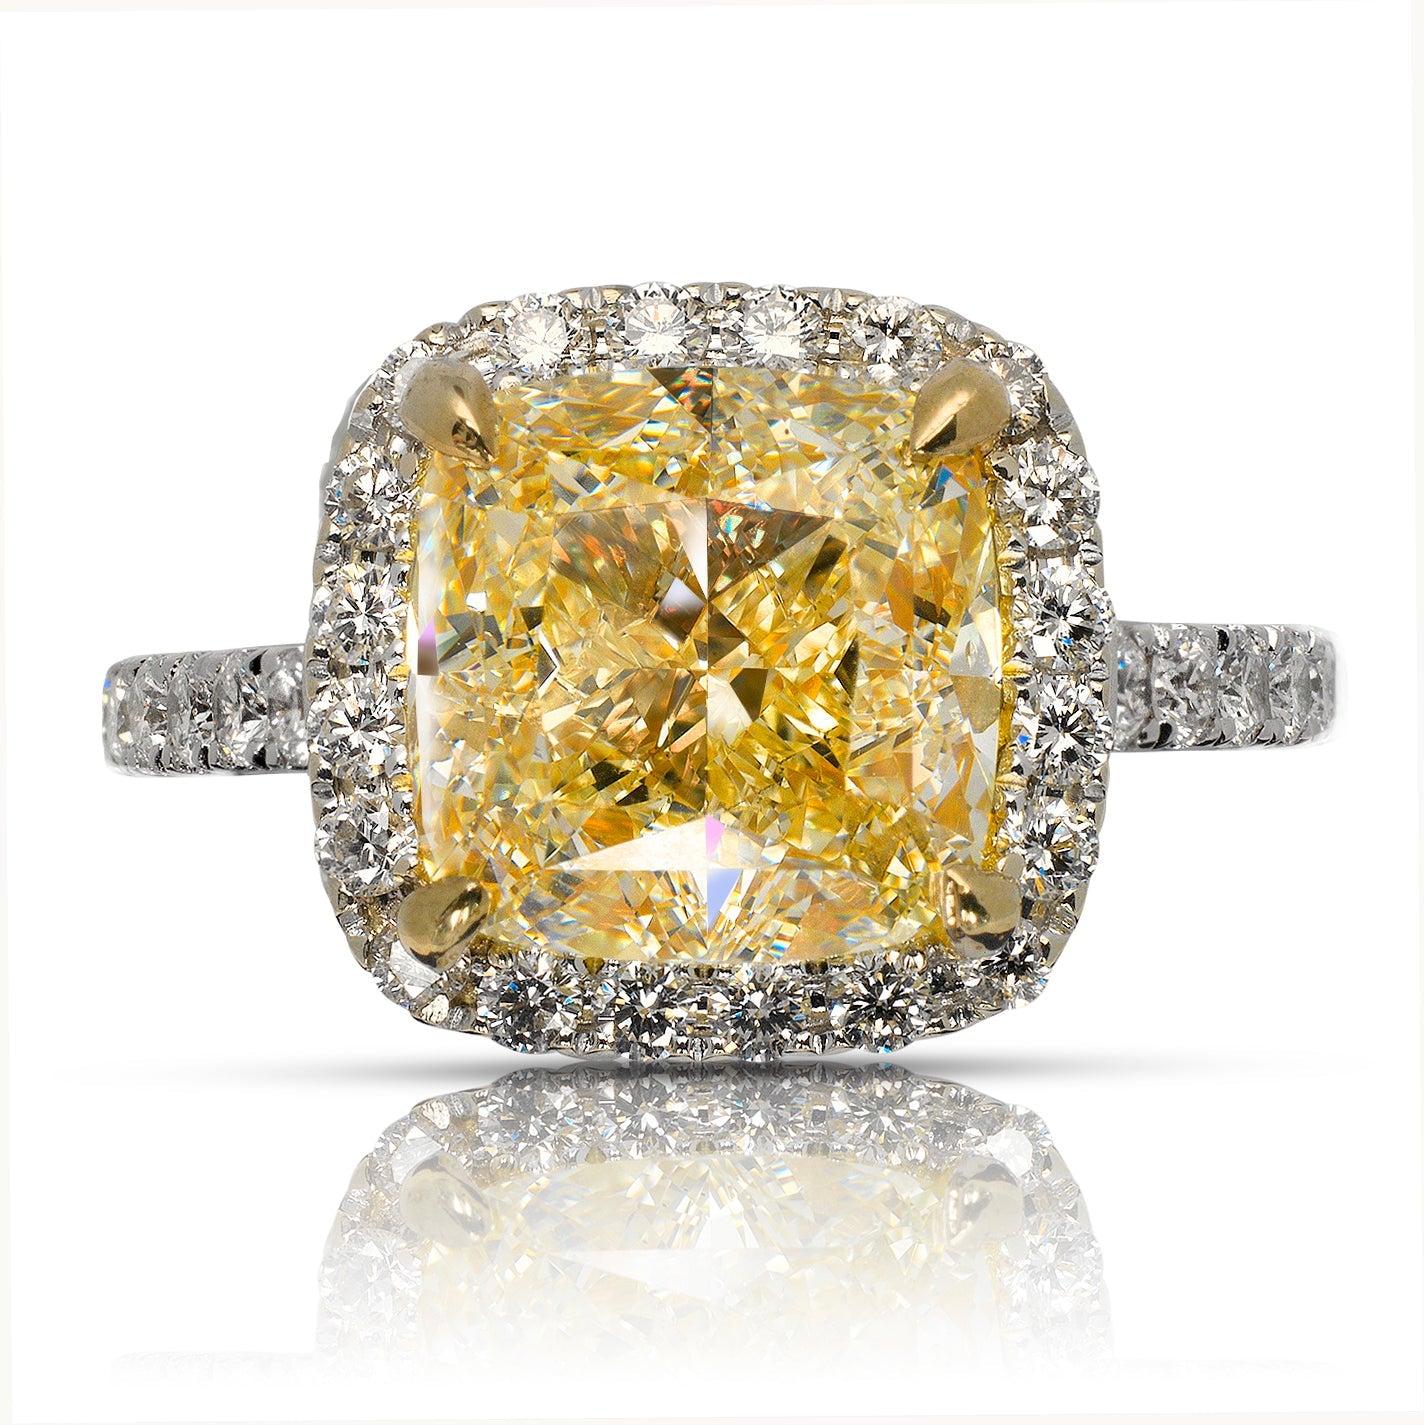 YSE -CUSHION CUT  YELLOW DIAMOND ENGAGEMENT RING BY MIKE NEKTA
GIA CERTIFIED

Center Diamond:
Carat Weight: 5 Carats
Color : W
Style: CUSHION CUT
Approximate Measurements: 9.2 x 9.0 x 6.4 mm 
 
Ring:
Metal: 18K WHITE GOLD 
Style: HALO DIAMOND